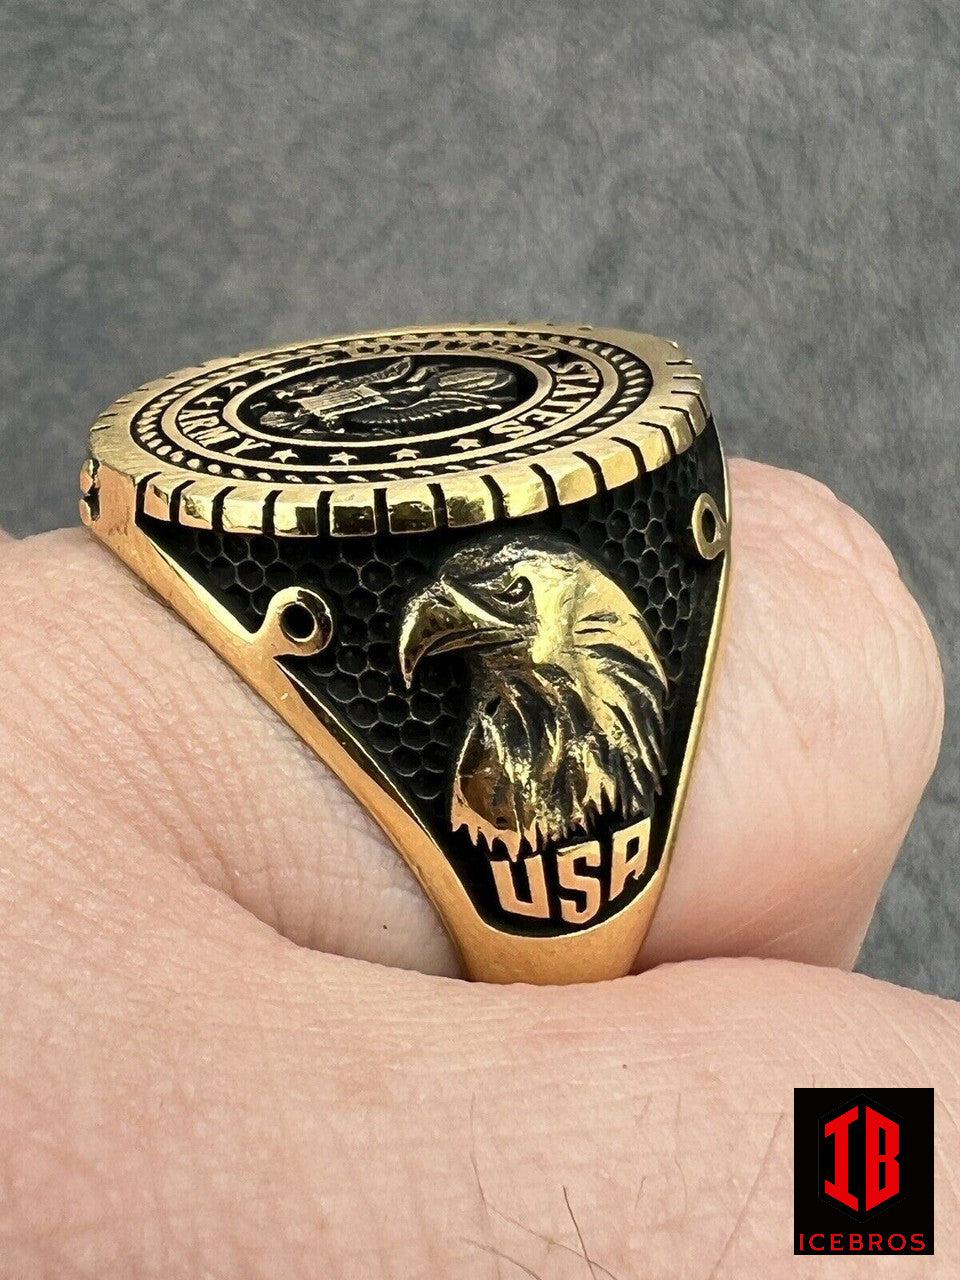 Men's Real 14k Gold Vermeil 925 Silver US Army Military Ring United States Enamel